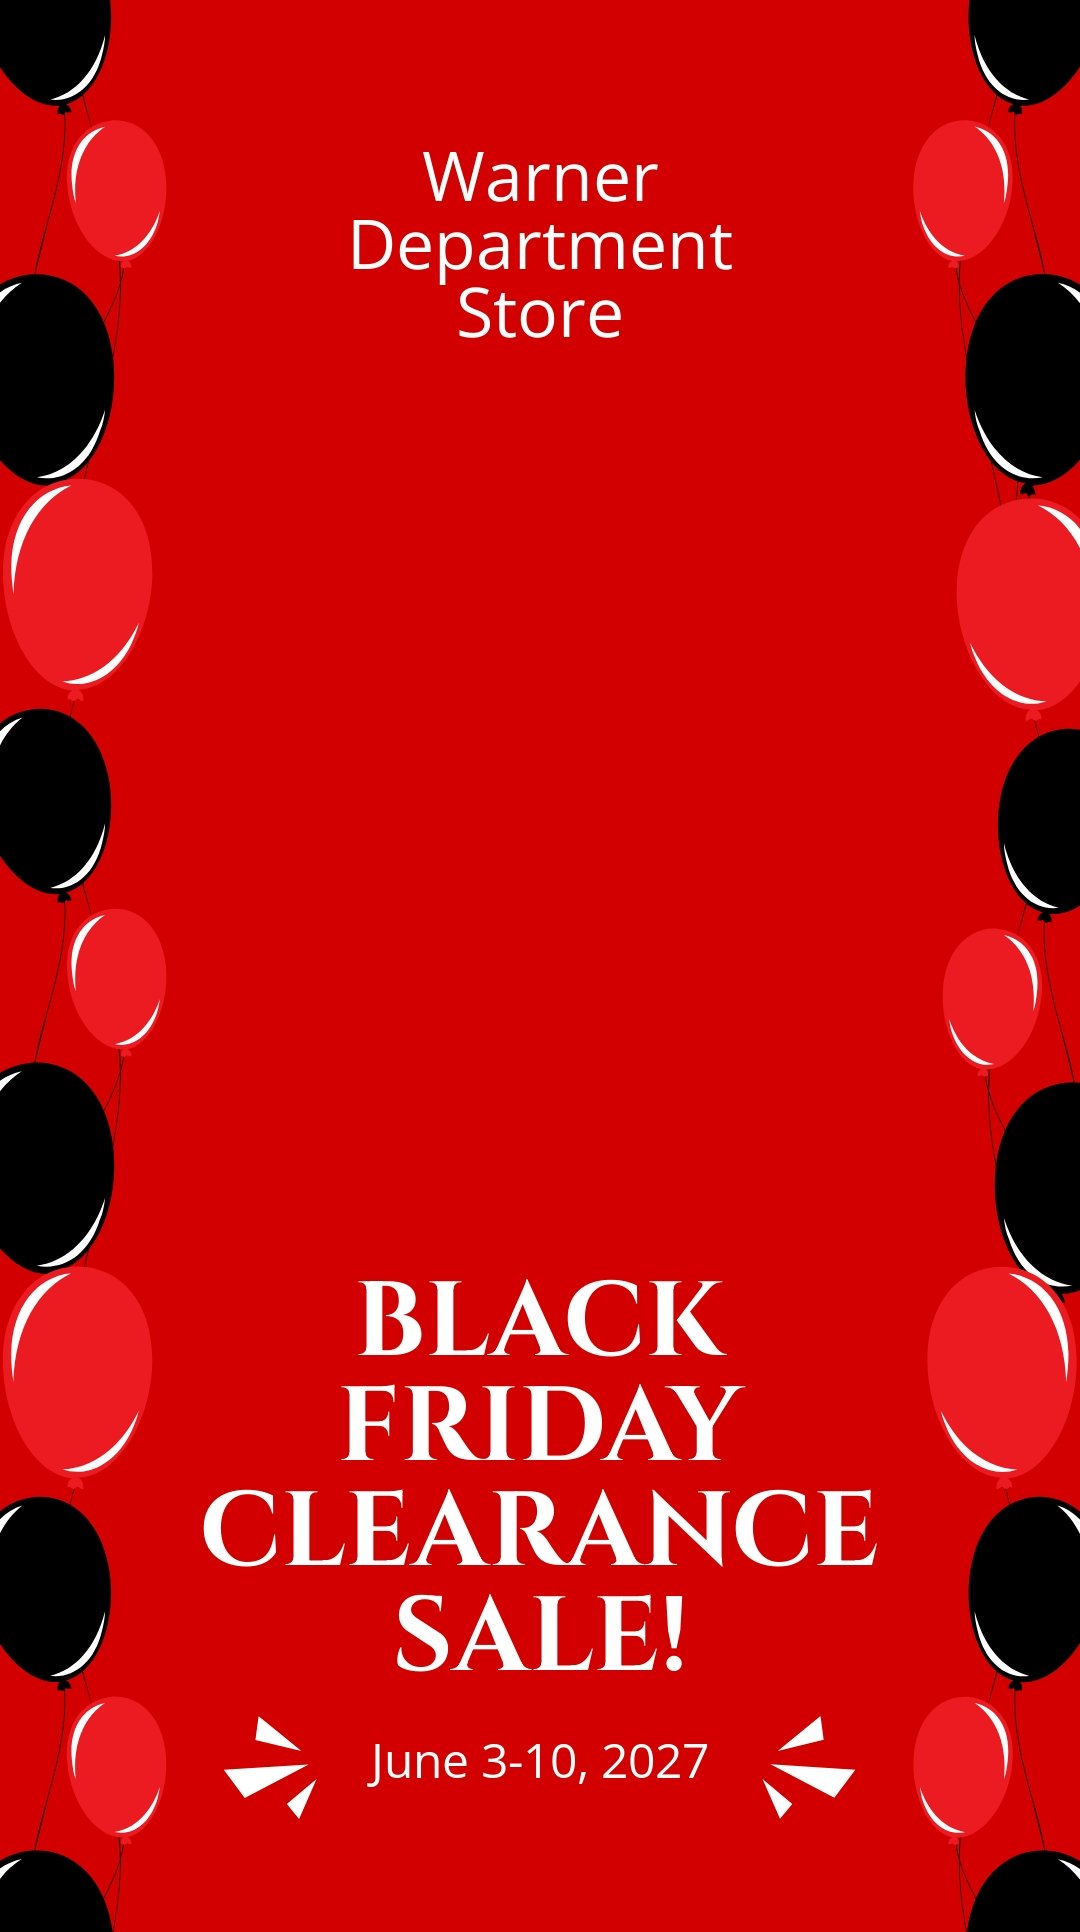 Black Friday Clearance Sale Snapchat Geofilter Template